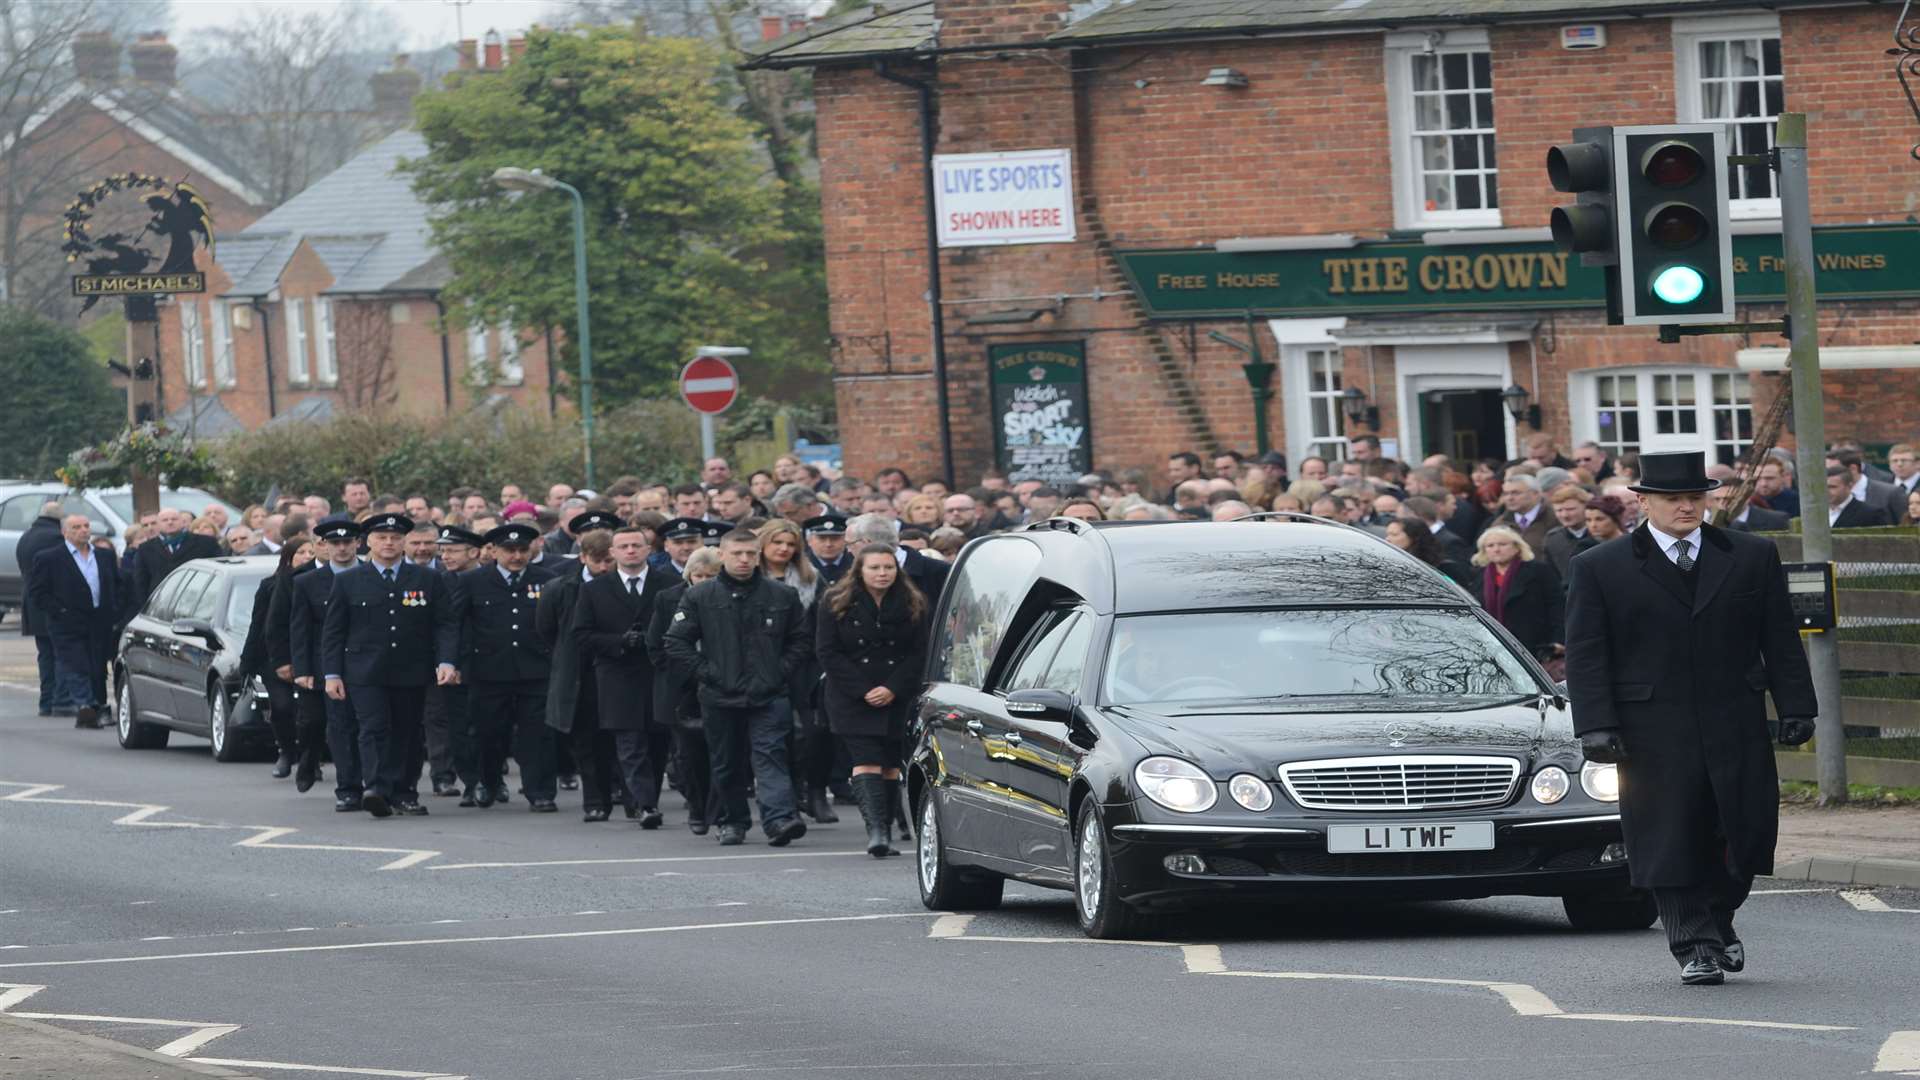 The funeral procession for Dazy Saunders sets off from The Crown pub on its way to nearby St Michaels Church